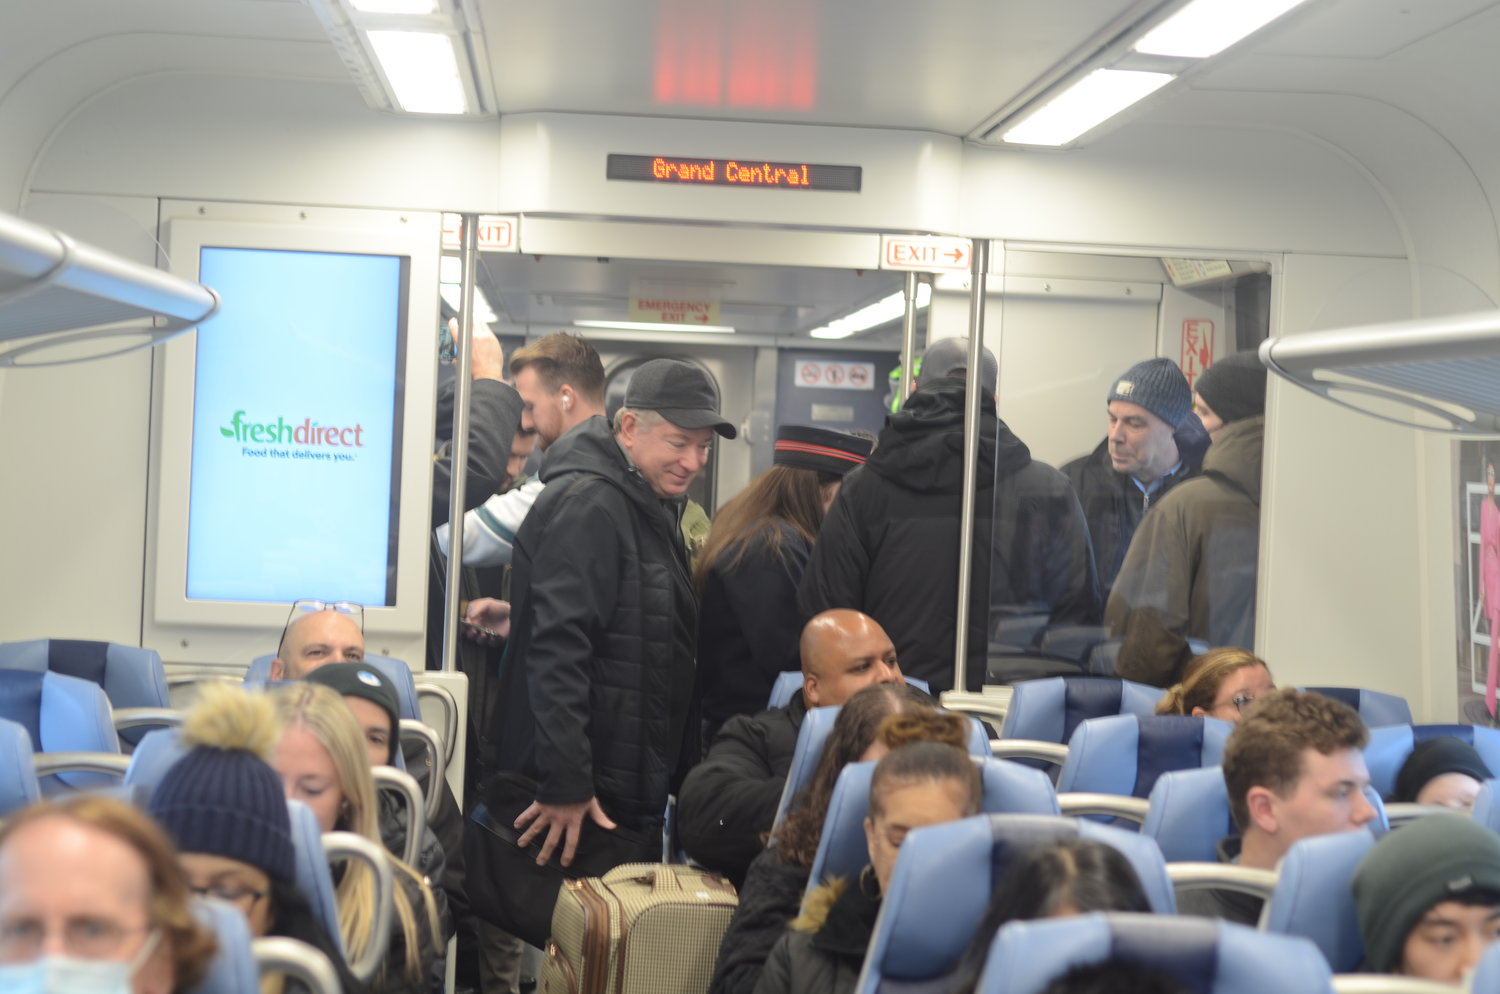 Commuters from Jamaica station boarded the first passenger Long Island Rail Road train to Grand Central Madison — inaugurating the Metropolitan Transportation Authority’s long-awaited East Side access that will soon provide LIRR service out of Grand Central Terminal.